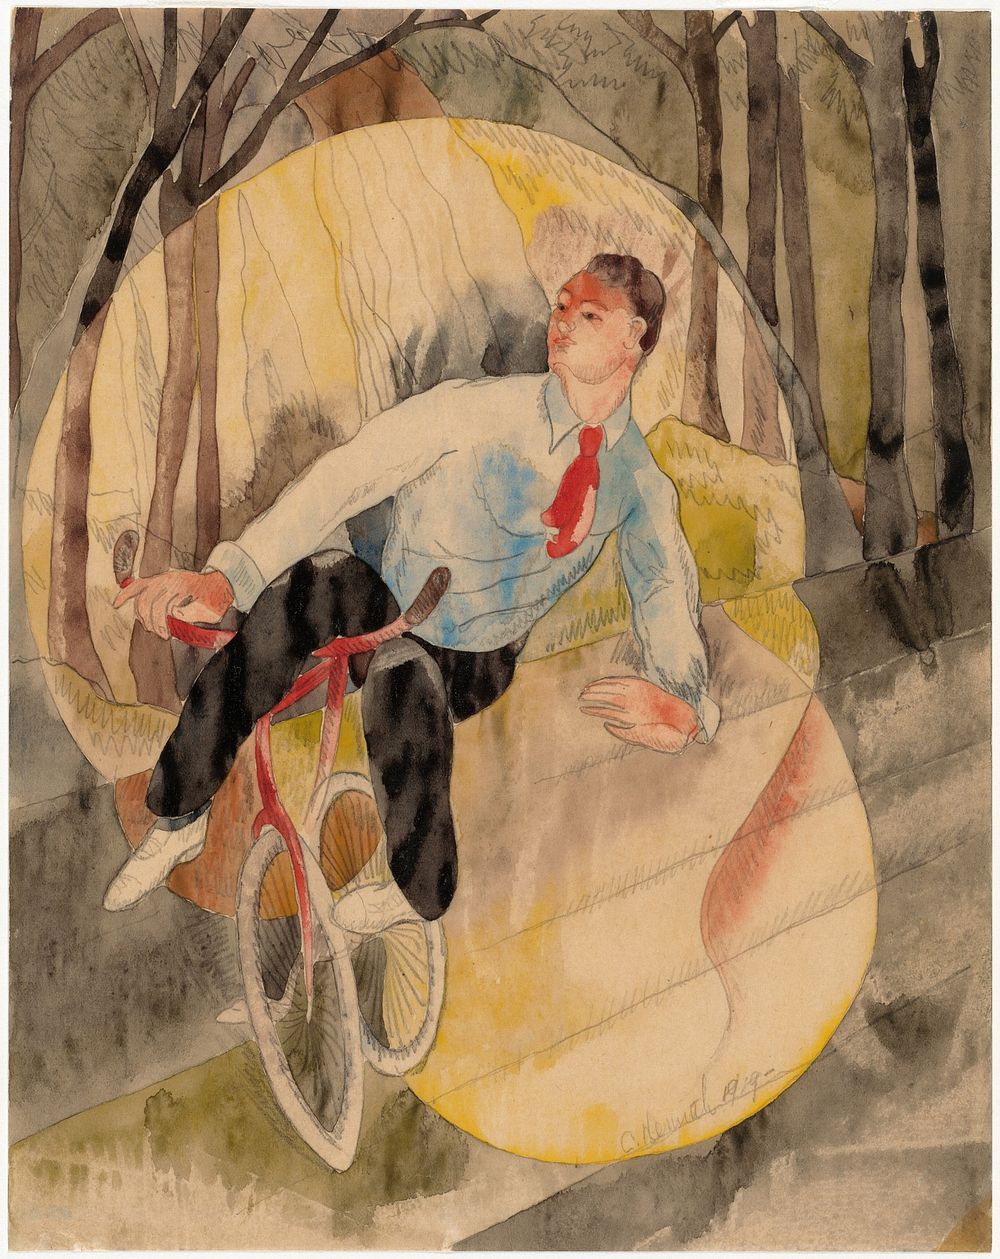 In Vaudeville, the Bicycle Rider (1919) painting in high resolution by Charles Demuth.  